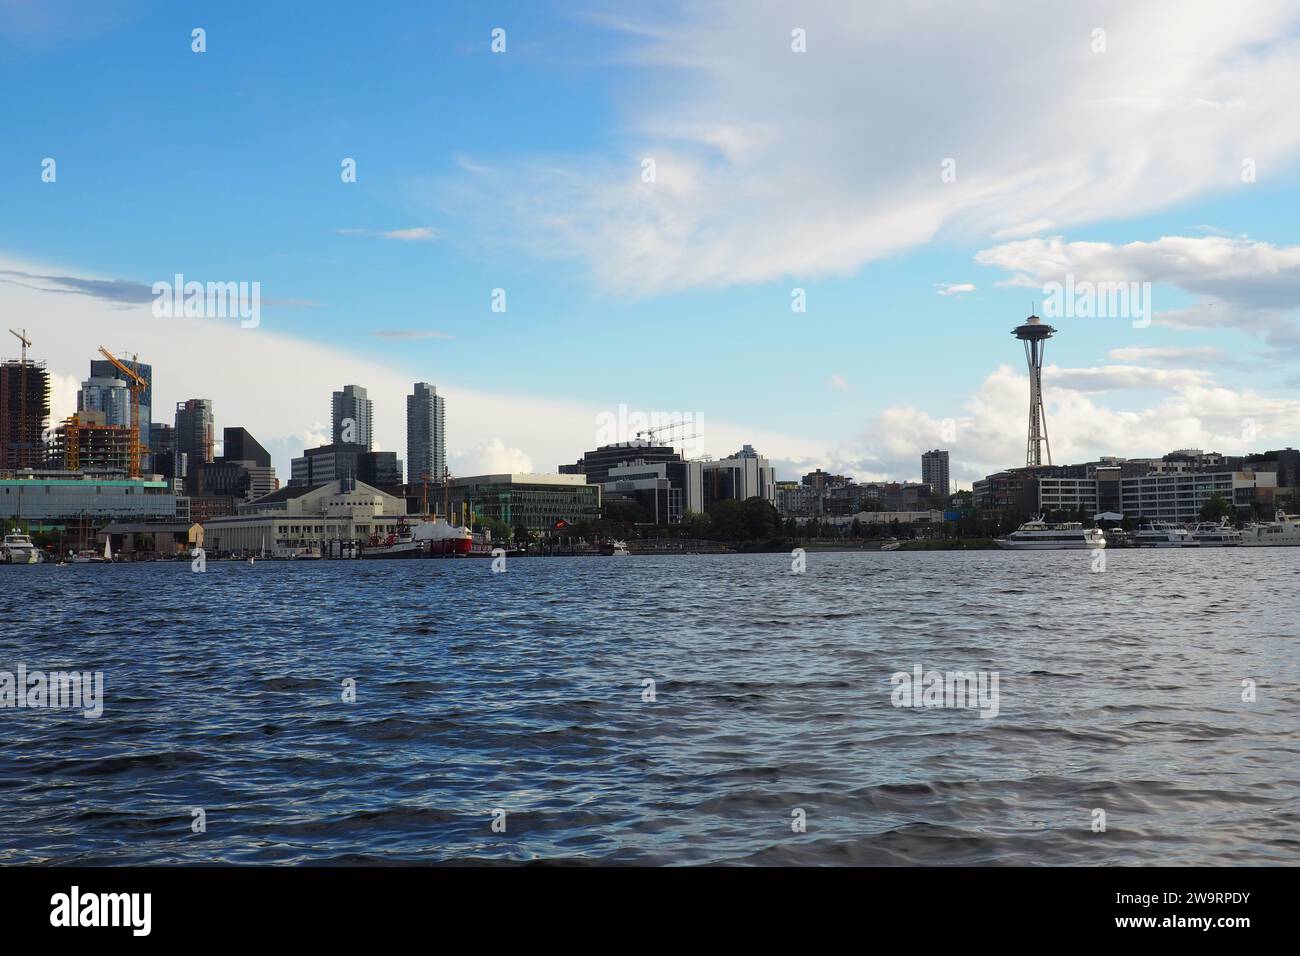 View of Seattle, WA from a boat on Lake Union on a sunny day, including South Lake Union, Queen Ann, and the Space Needle. Stock Photo